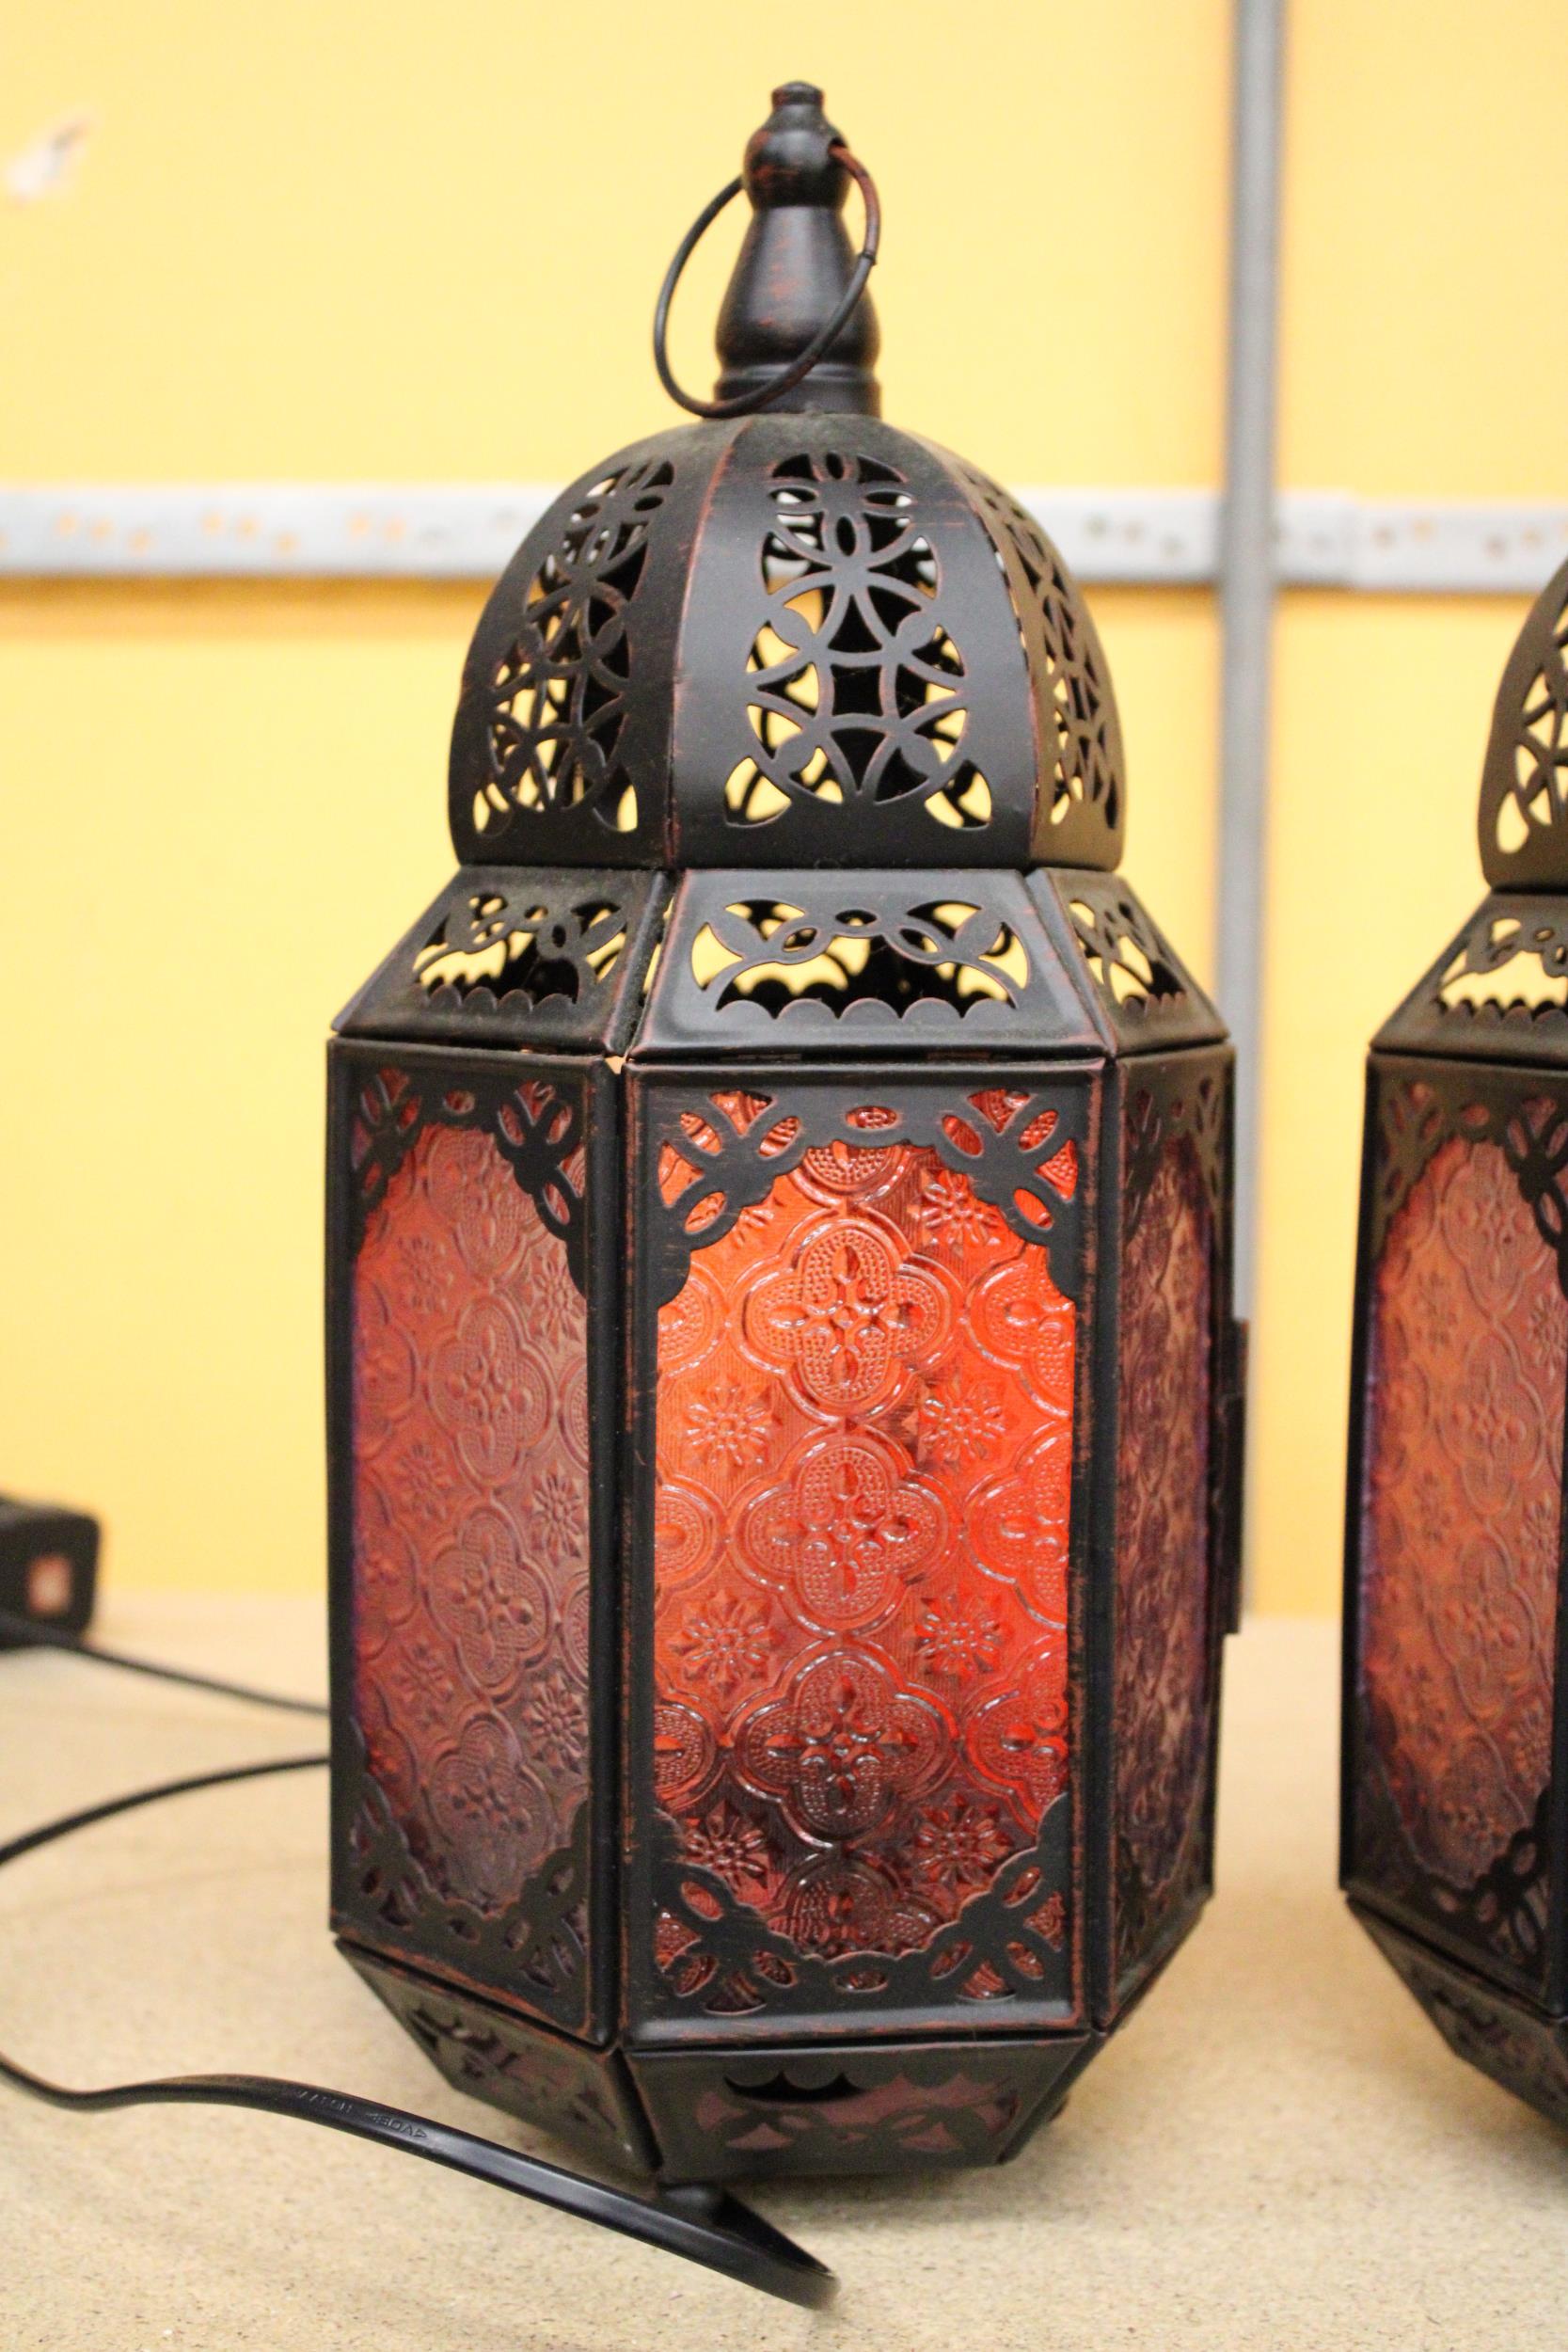 A PAIR OF MOROCCAN STYLE TABLE LAMPS - Image 2 of 4